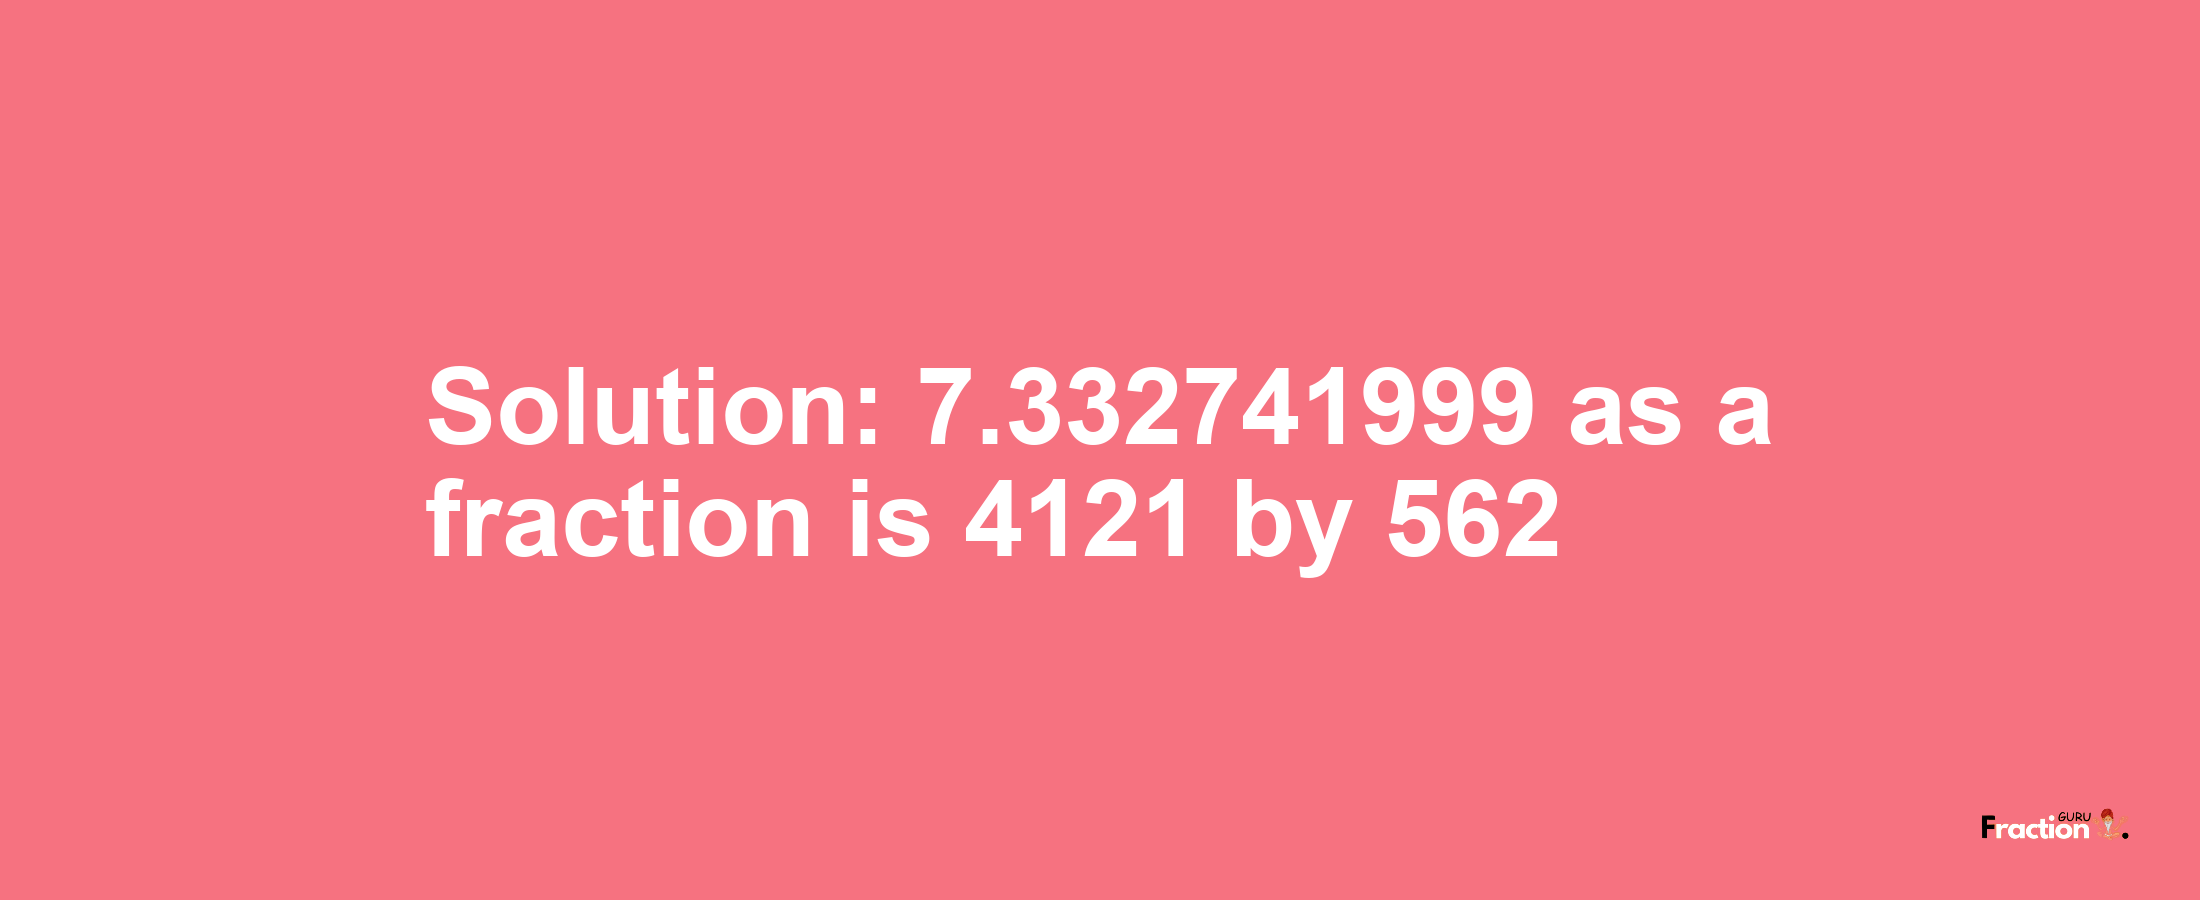 Solution:7.332741999 as a fraction is 4121/562